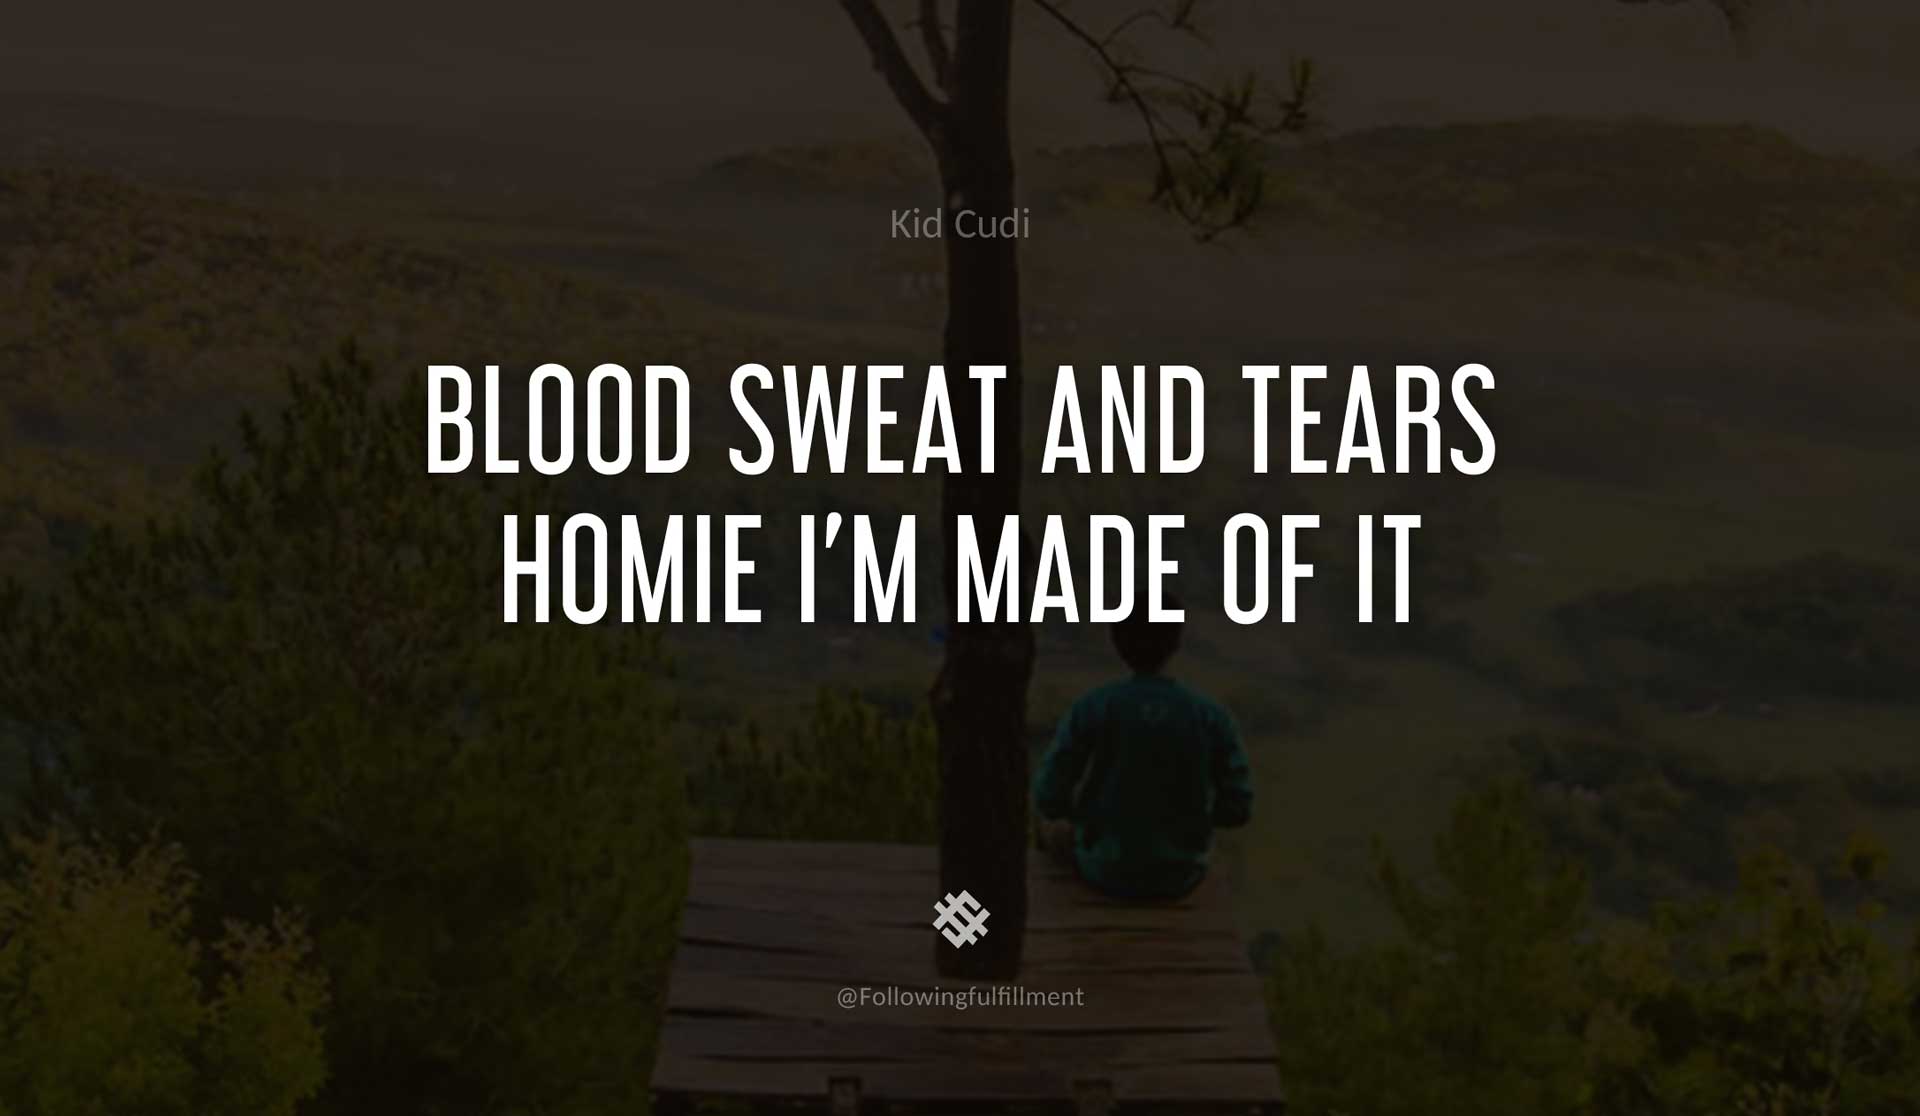 Blood-sweat-and-tears-homie-I'm-made-of-it-KID-CUDI-Quote.jpg